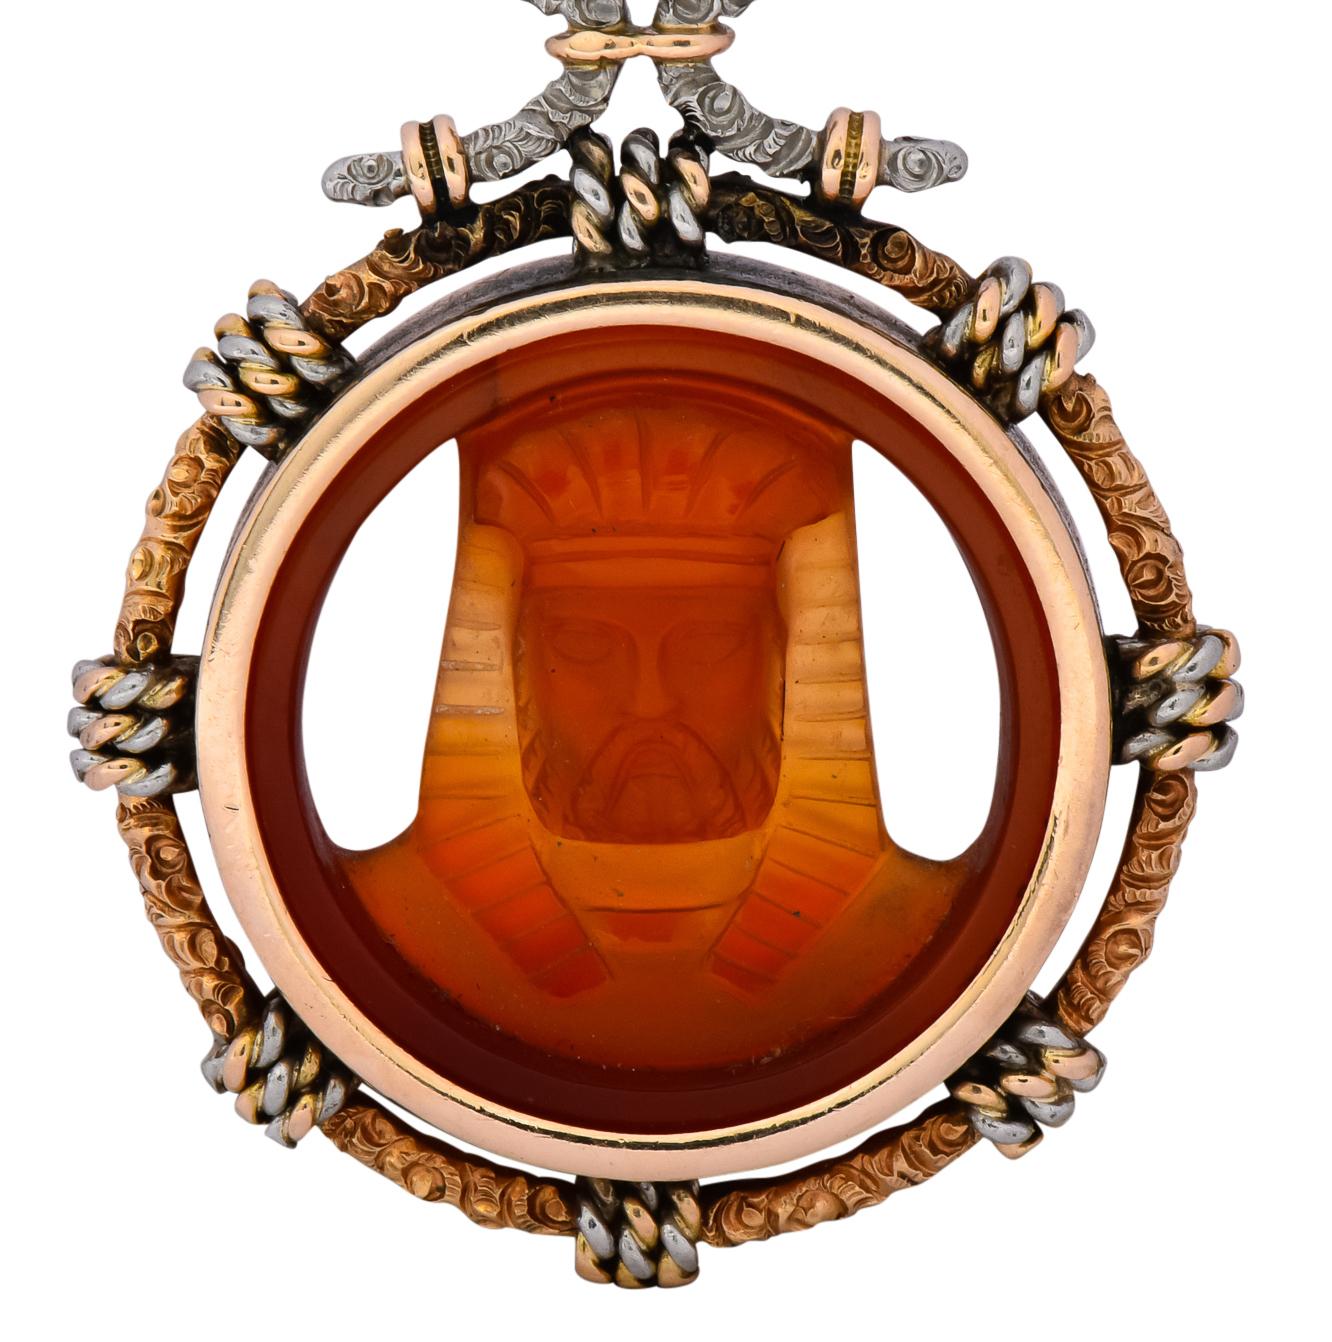 Centering a deeply carved carnelian depicting the image of a young Pharaoh in headdress with reverse side depicting the same Pharaoh, older, with a majestic beard

Set in a high polished gold surround with an ornately engraved gold frame with